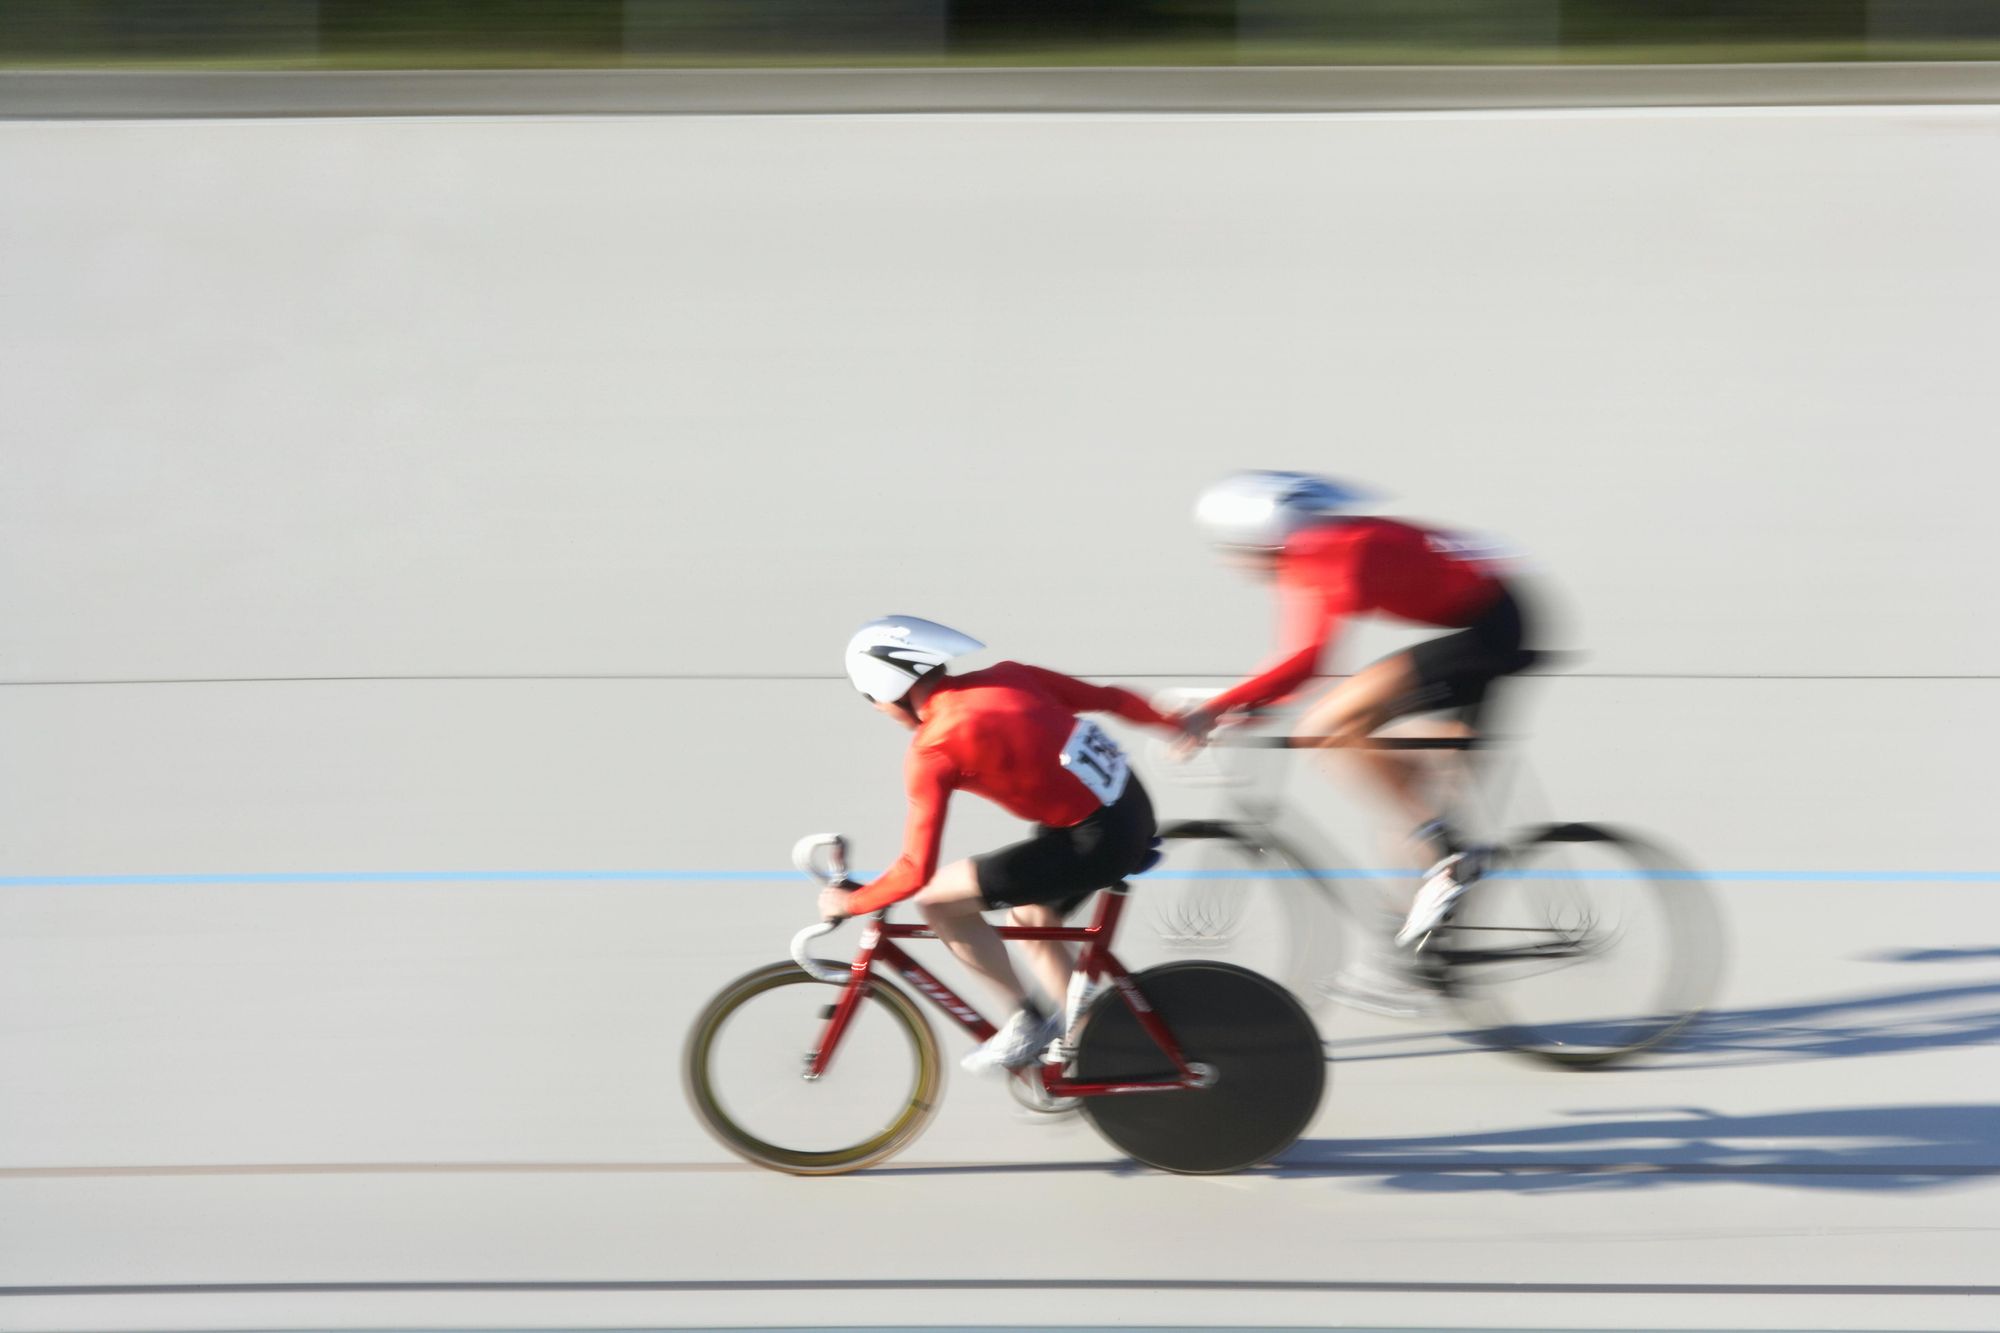 One racer propels their partner like a slingshot during a Madison race on track. Photo: Getty